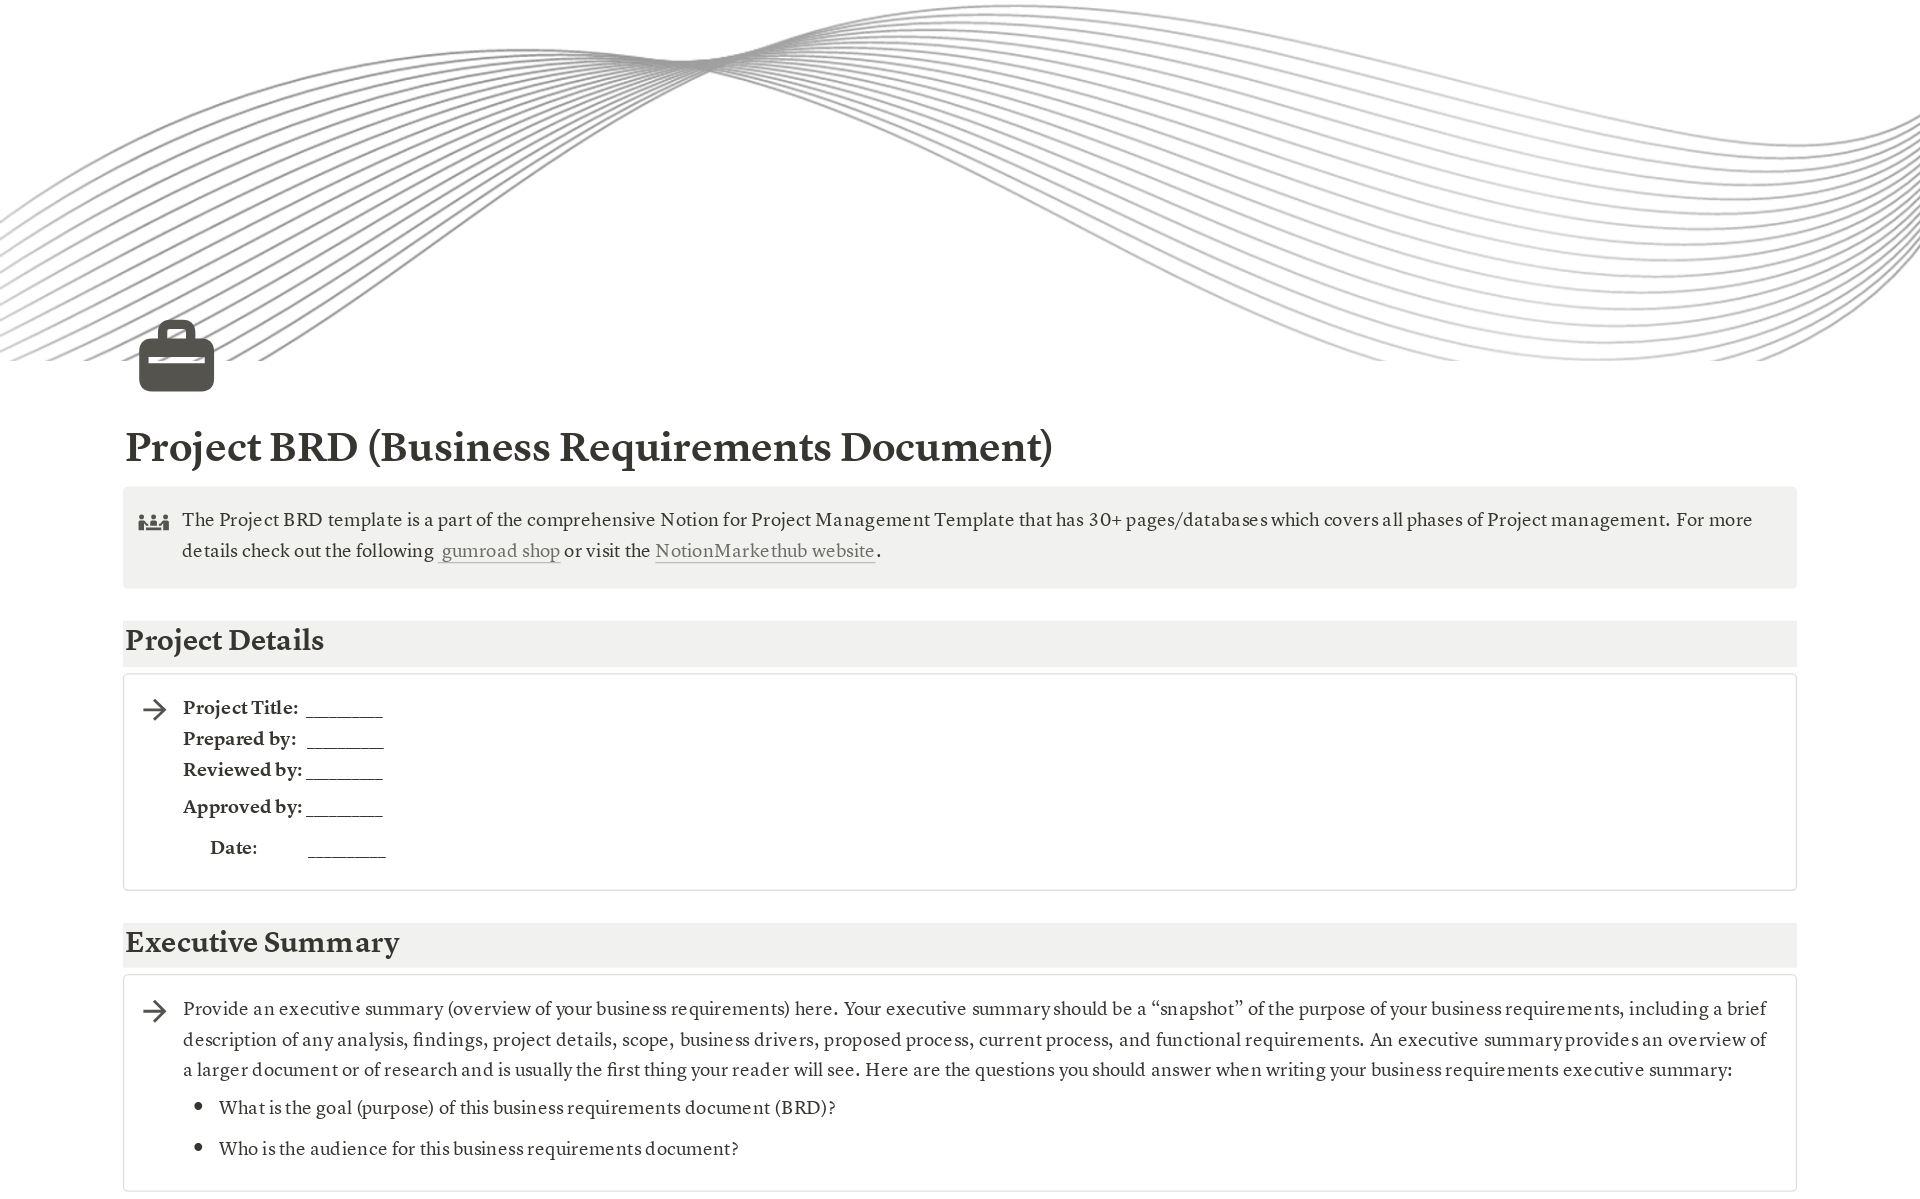 Business Requirements Document BRD for Projectsのテンプレートのプレビュー